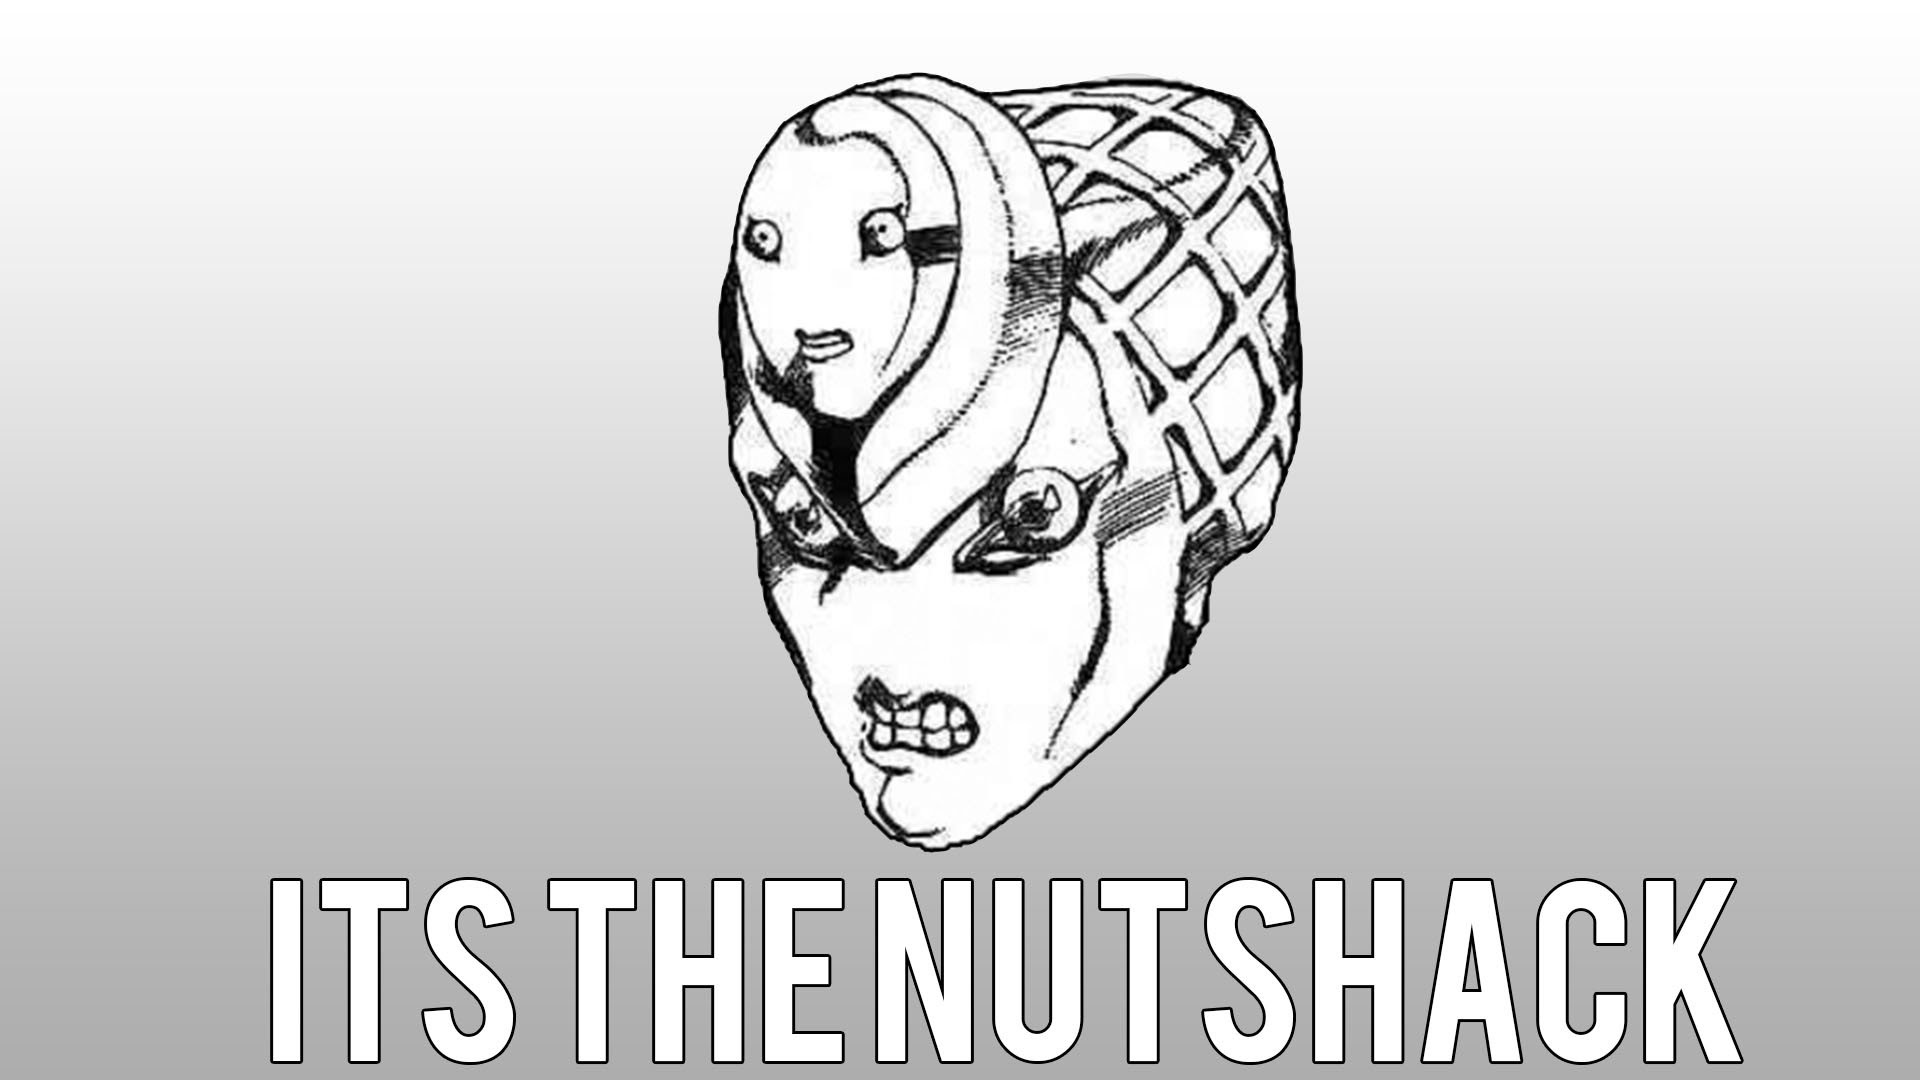 1920x1080 The nutshack theme but everytime nutshack is said, King Crimson erases time